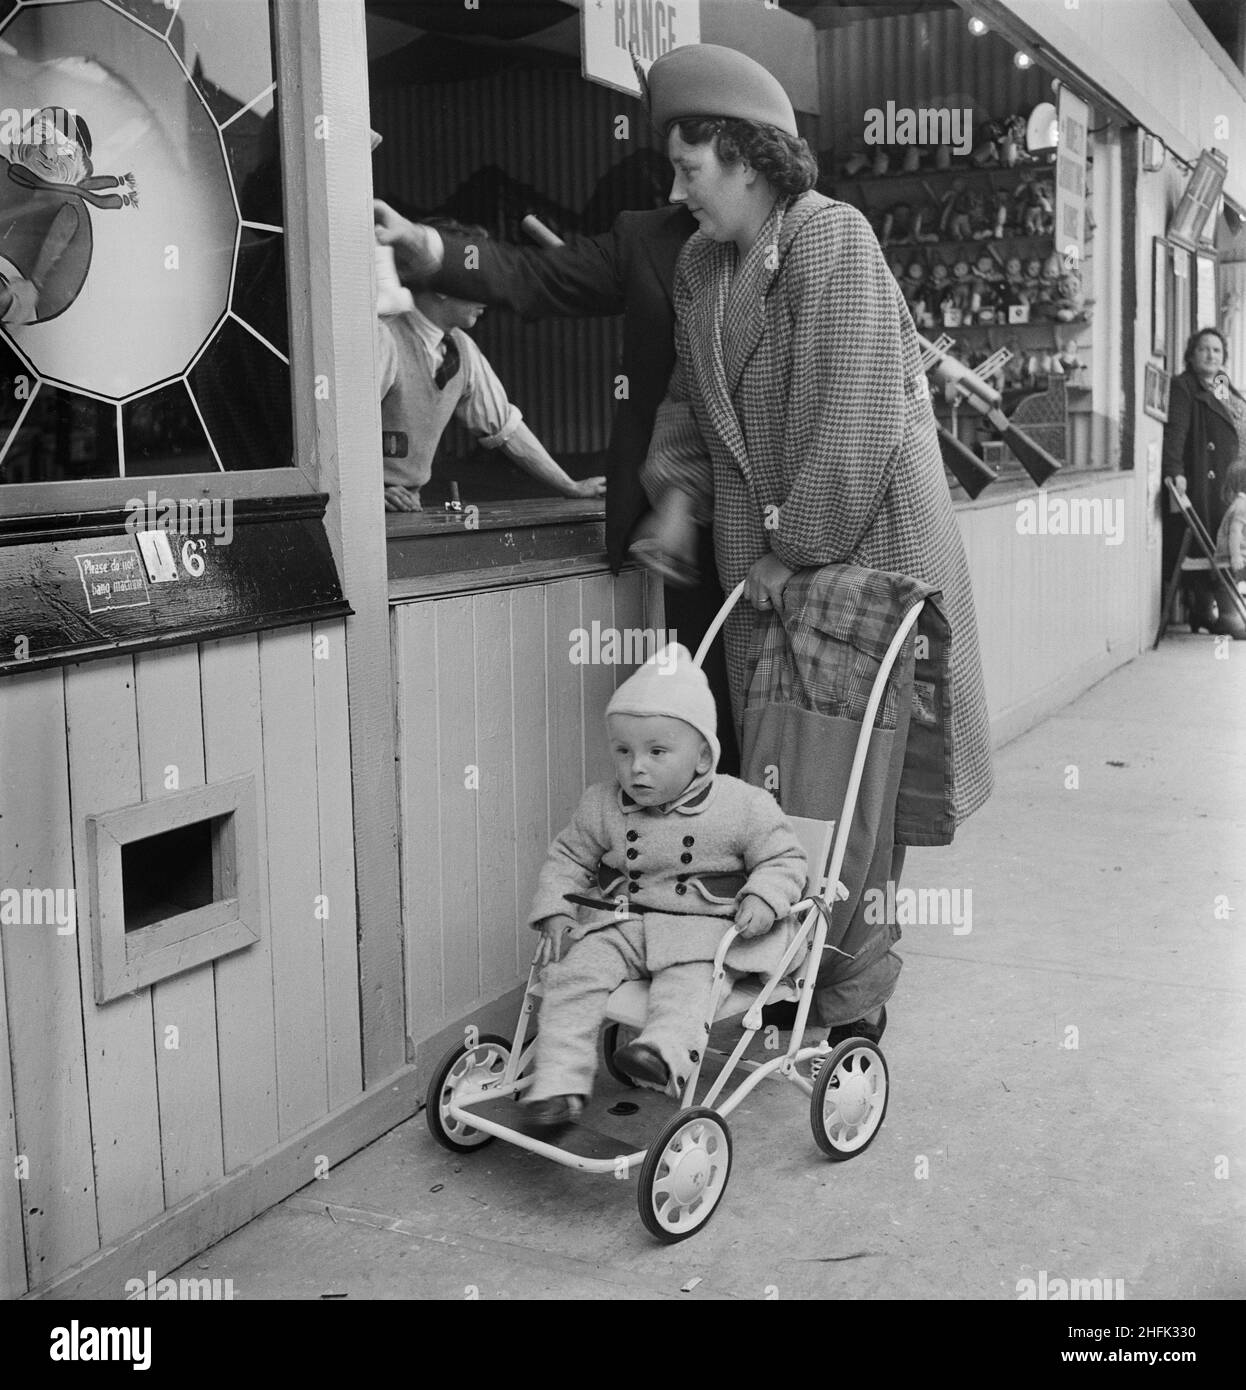 Skegness, East Lindsey, Lincolnshire, 12/06/1948. A woman with a child in a pushchair at an amusement park during a Laing staff outing to Skegness. A group of about 100 people attended this outing from contracts in Grimsby, Carrington's Coppice, East Leake and Leicester. Stock Photo